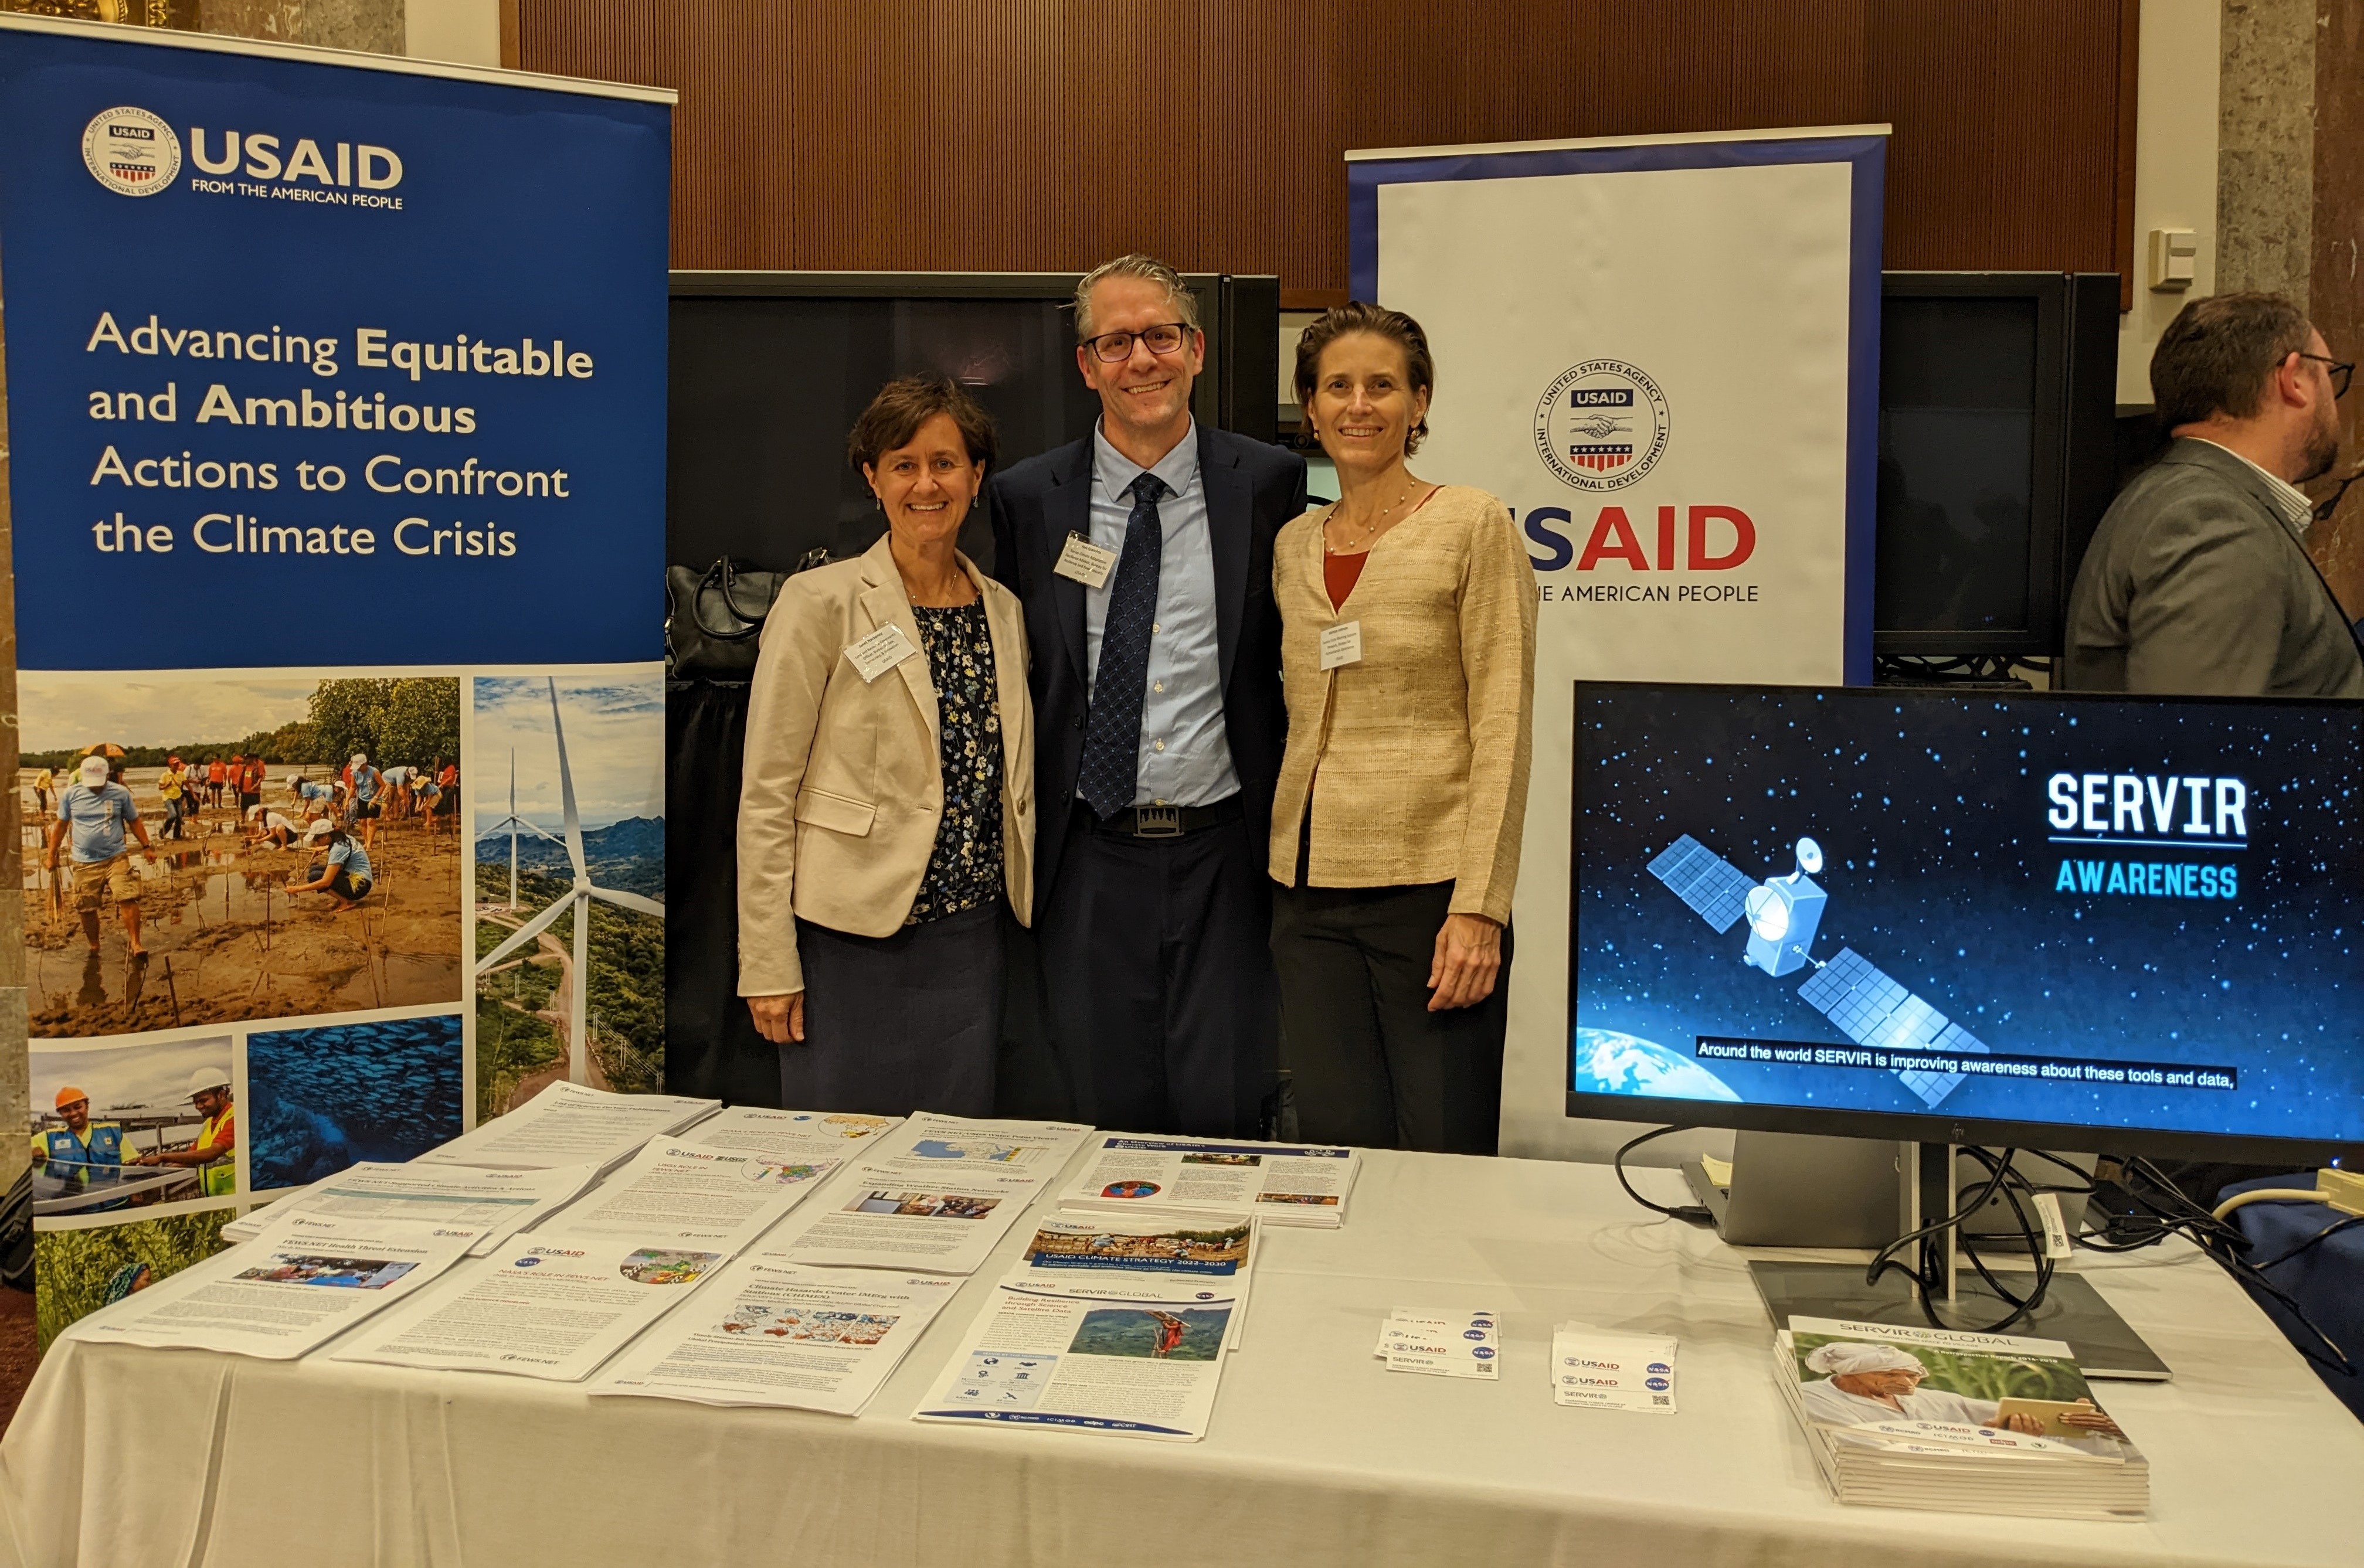 3 USAID staff standing at table